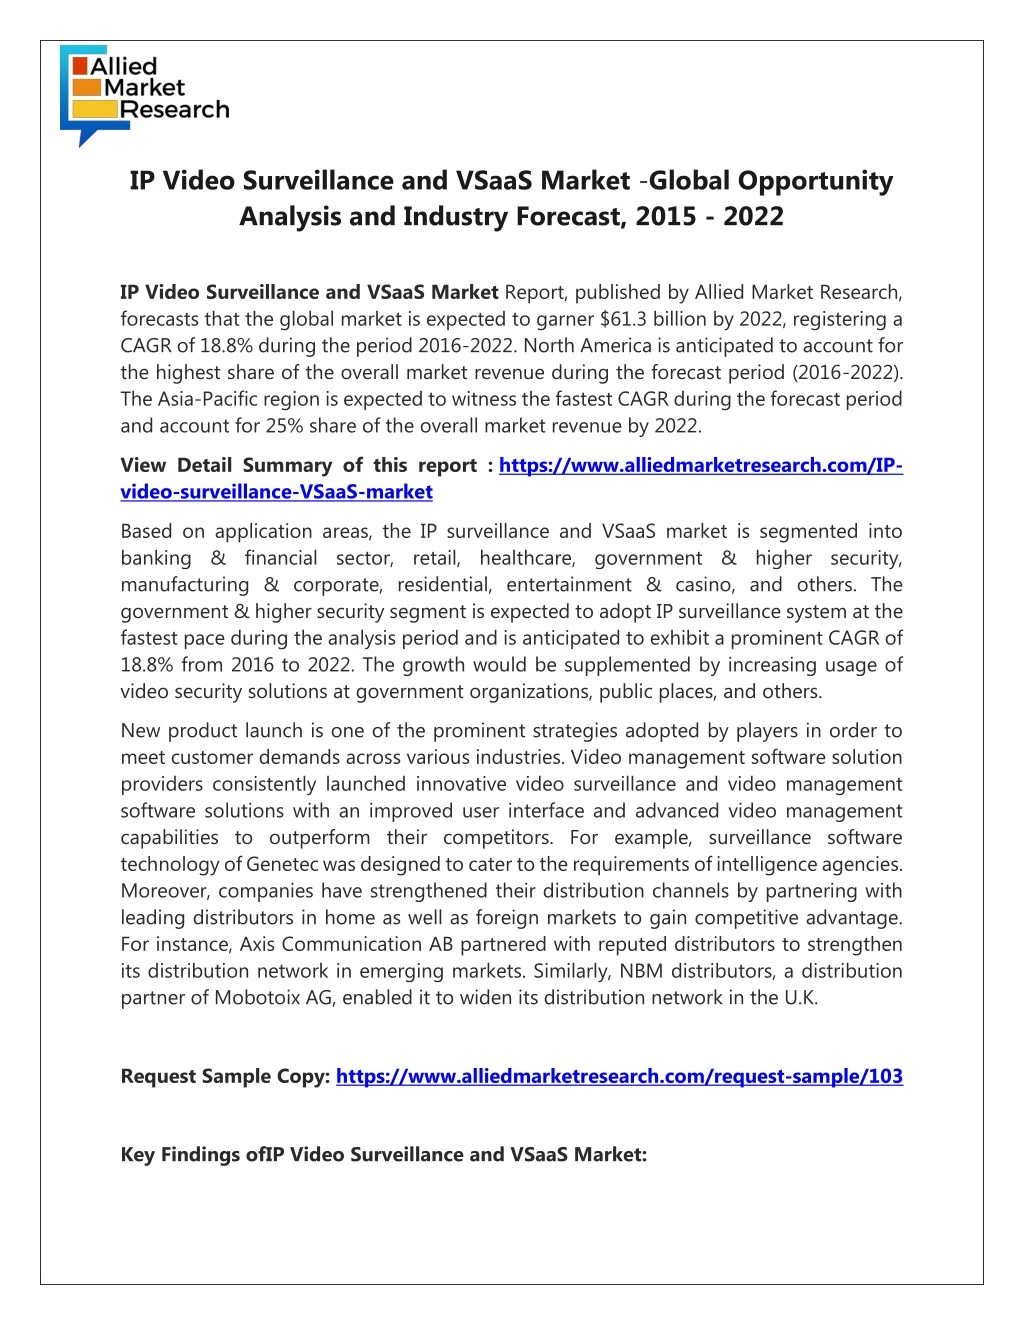 ip video surveillance and vsaas market global